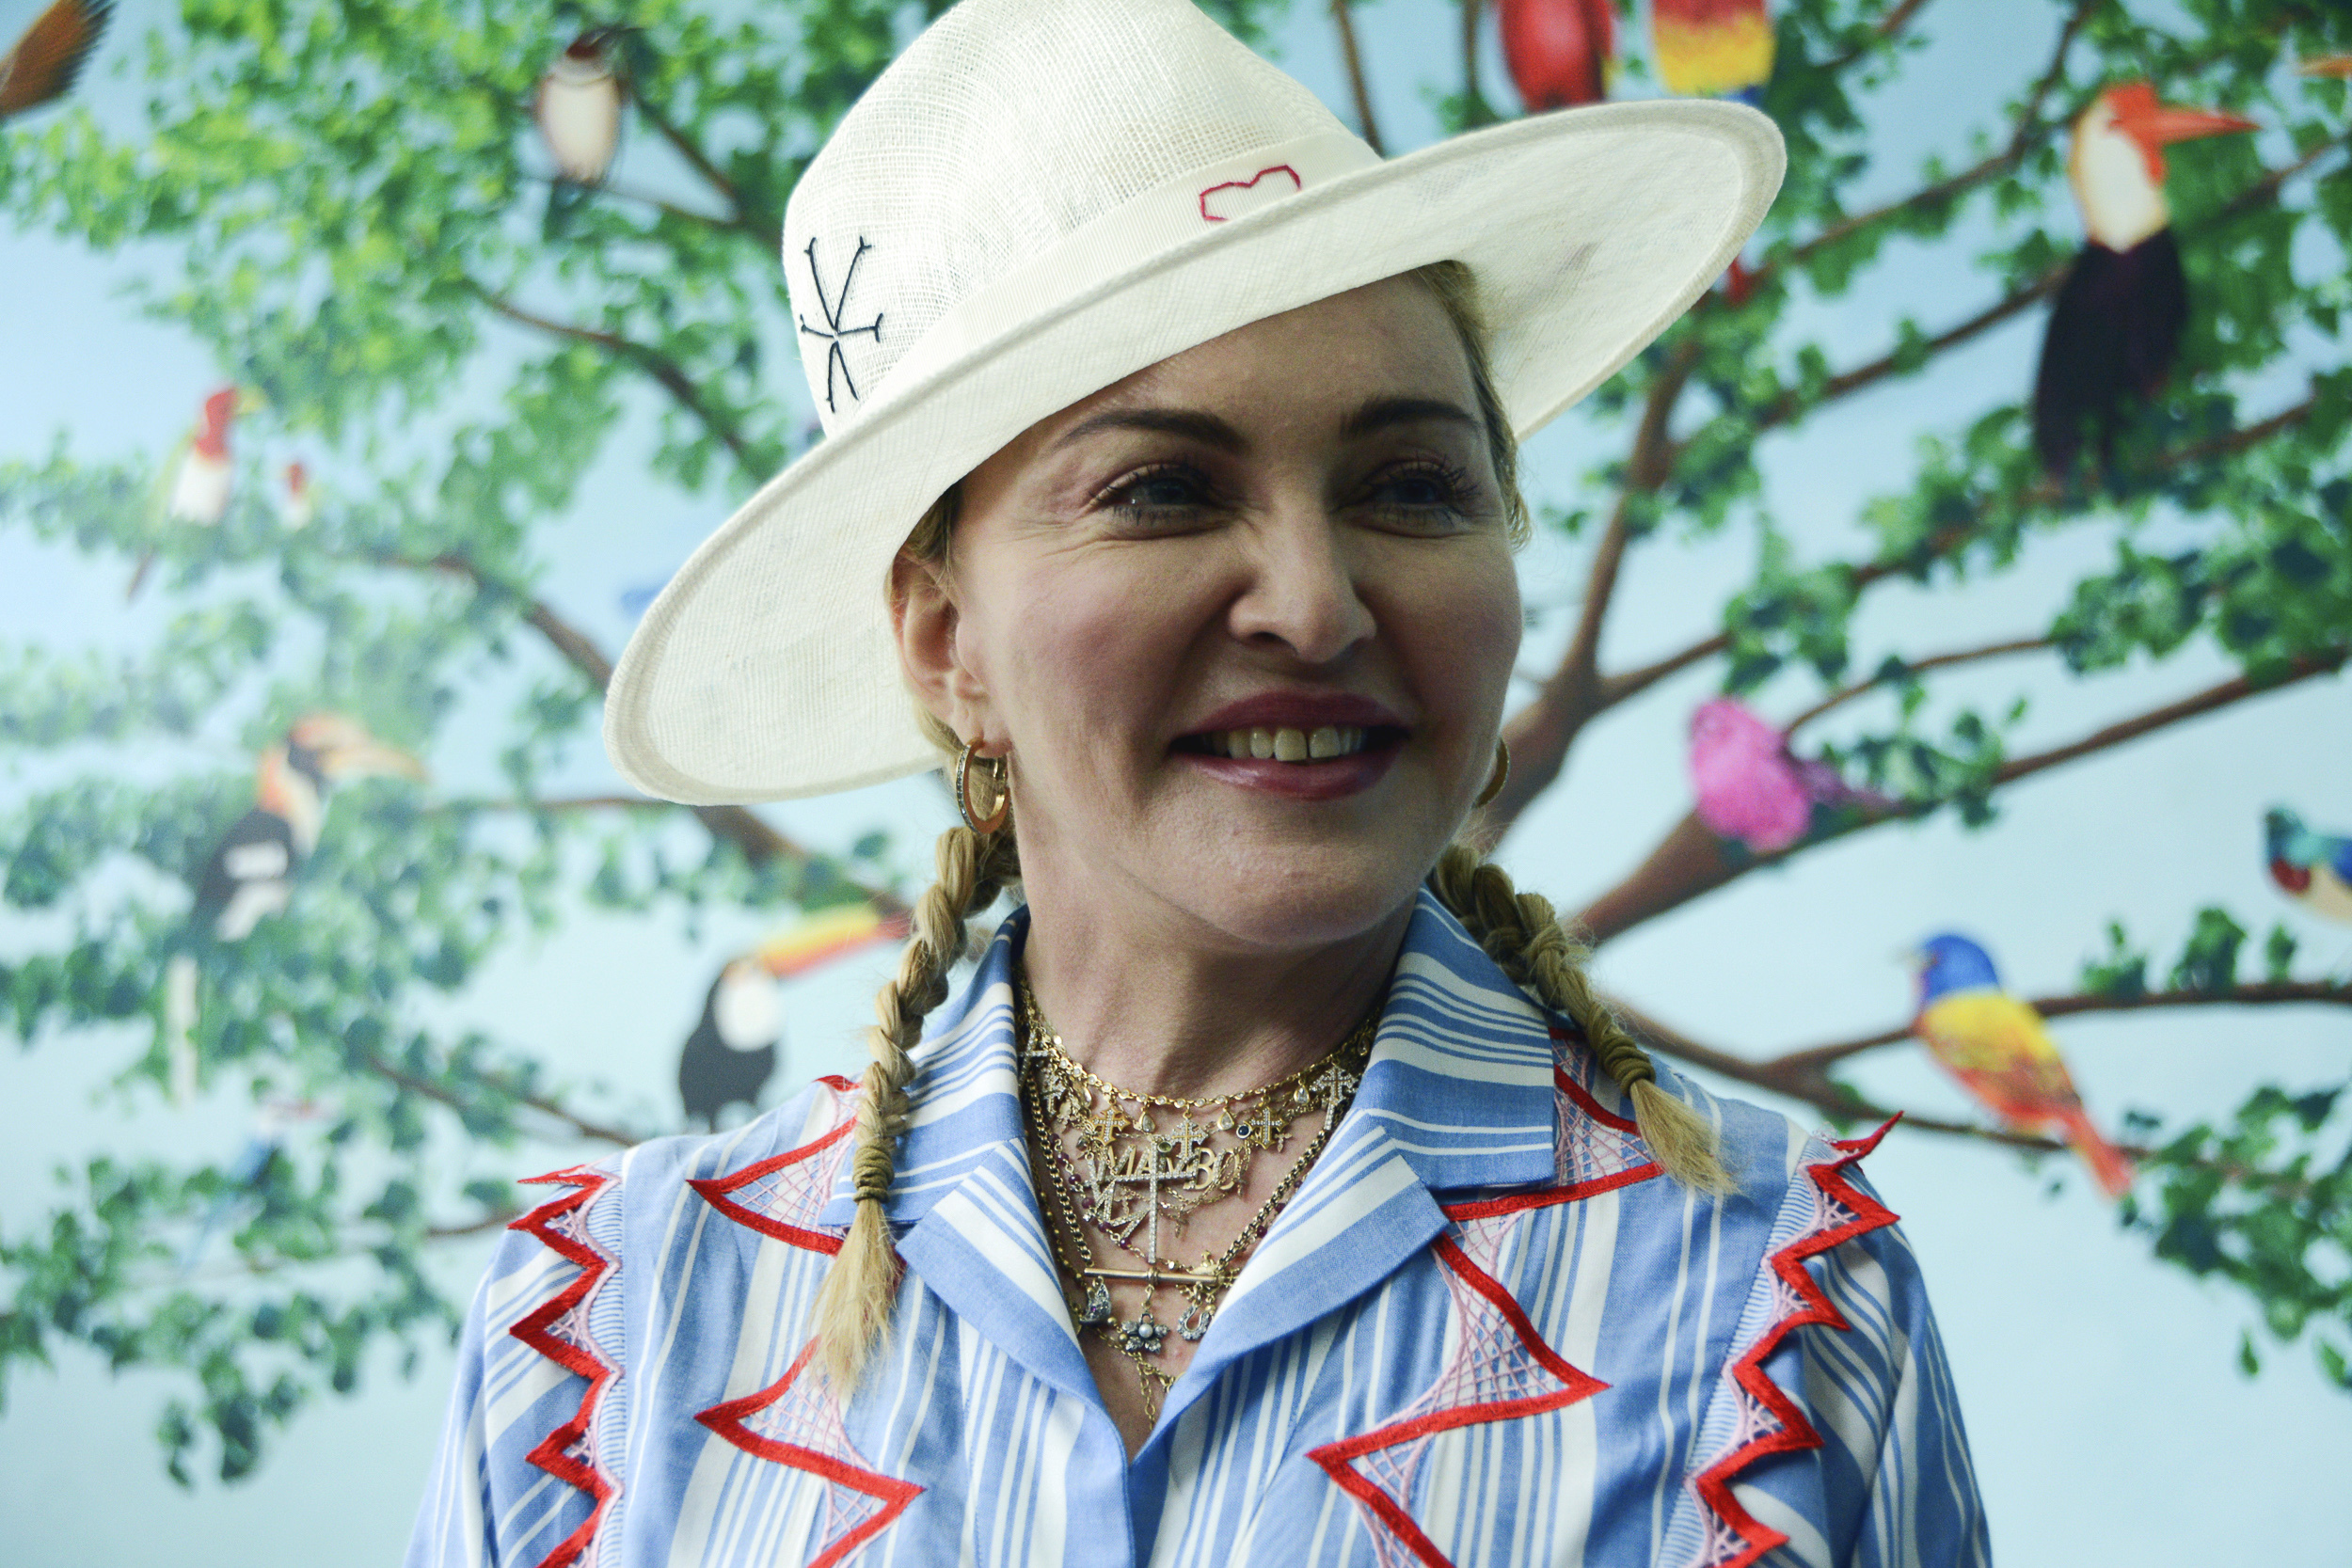 FILE - In this July 16, 2018 file photo, U.S. singer Madonna speaks to the press at a news conference in Blantyre, Malawi. Madonna is celebrating her upcoming 60th birthday with a fundraiser to raise funds for orphans and children in Malawi. The singer tells The Associated Press she’s teaming with Facebook for the fundraiser, which runs from Monday through Aug. 31.  (AP Photo/Thoko Chikondi, File)